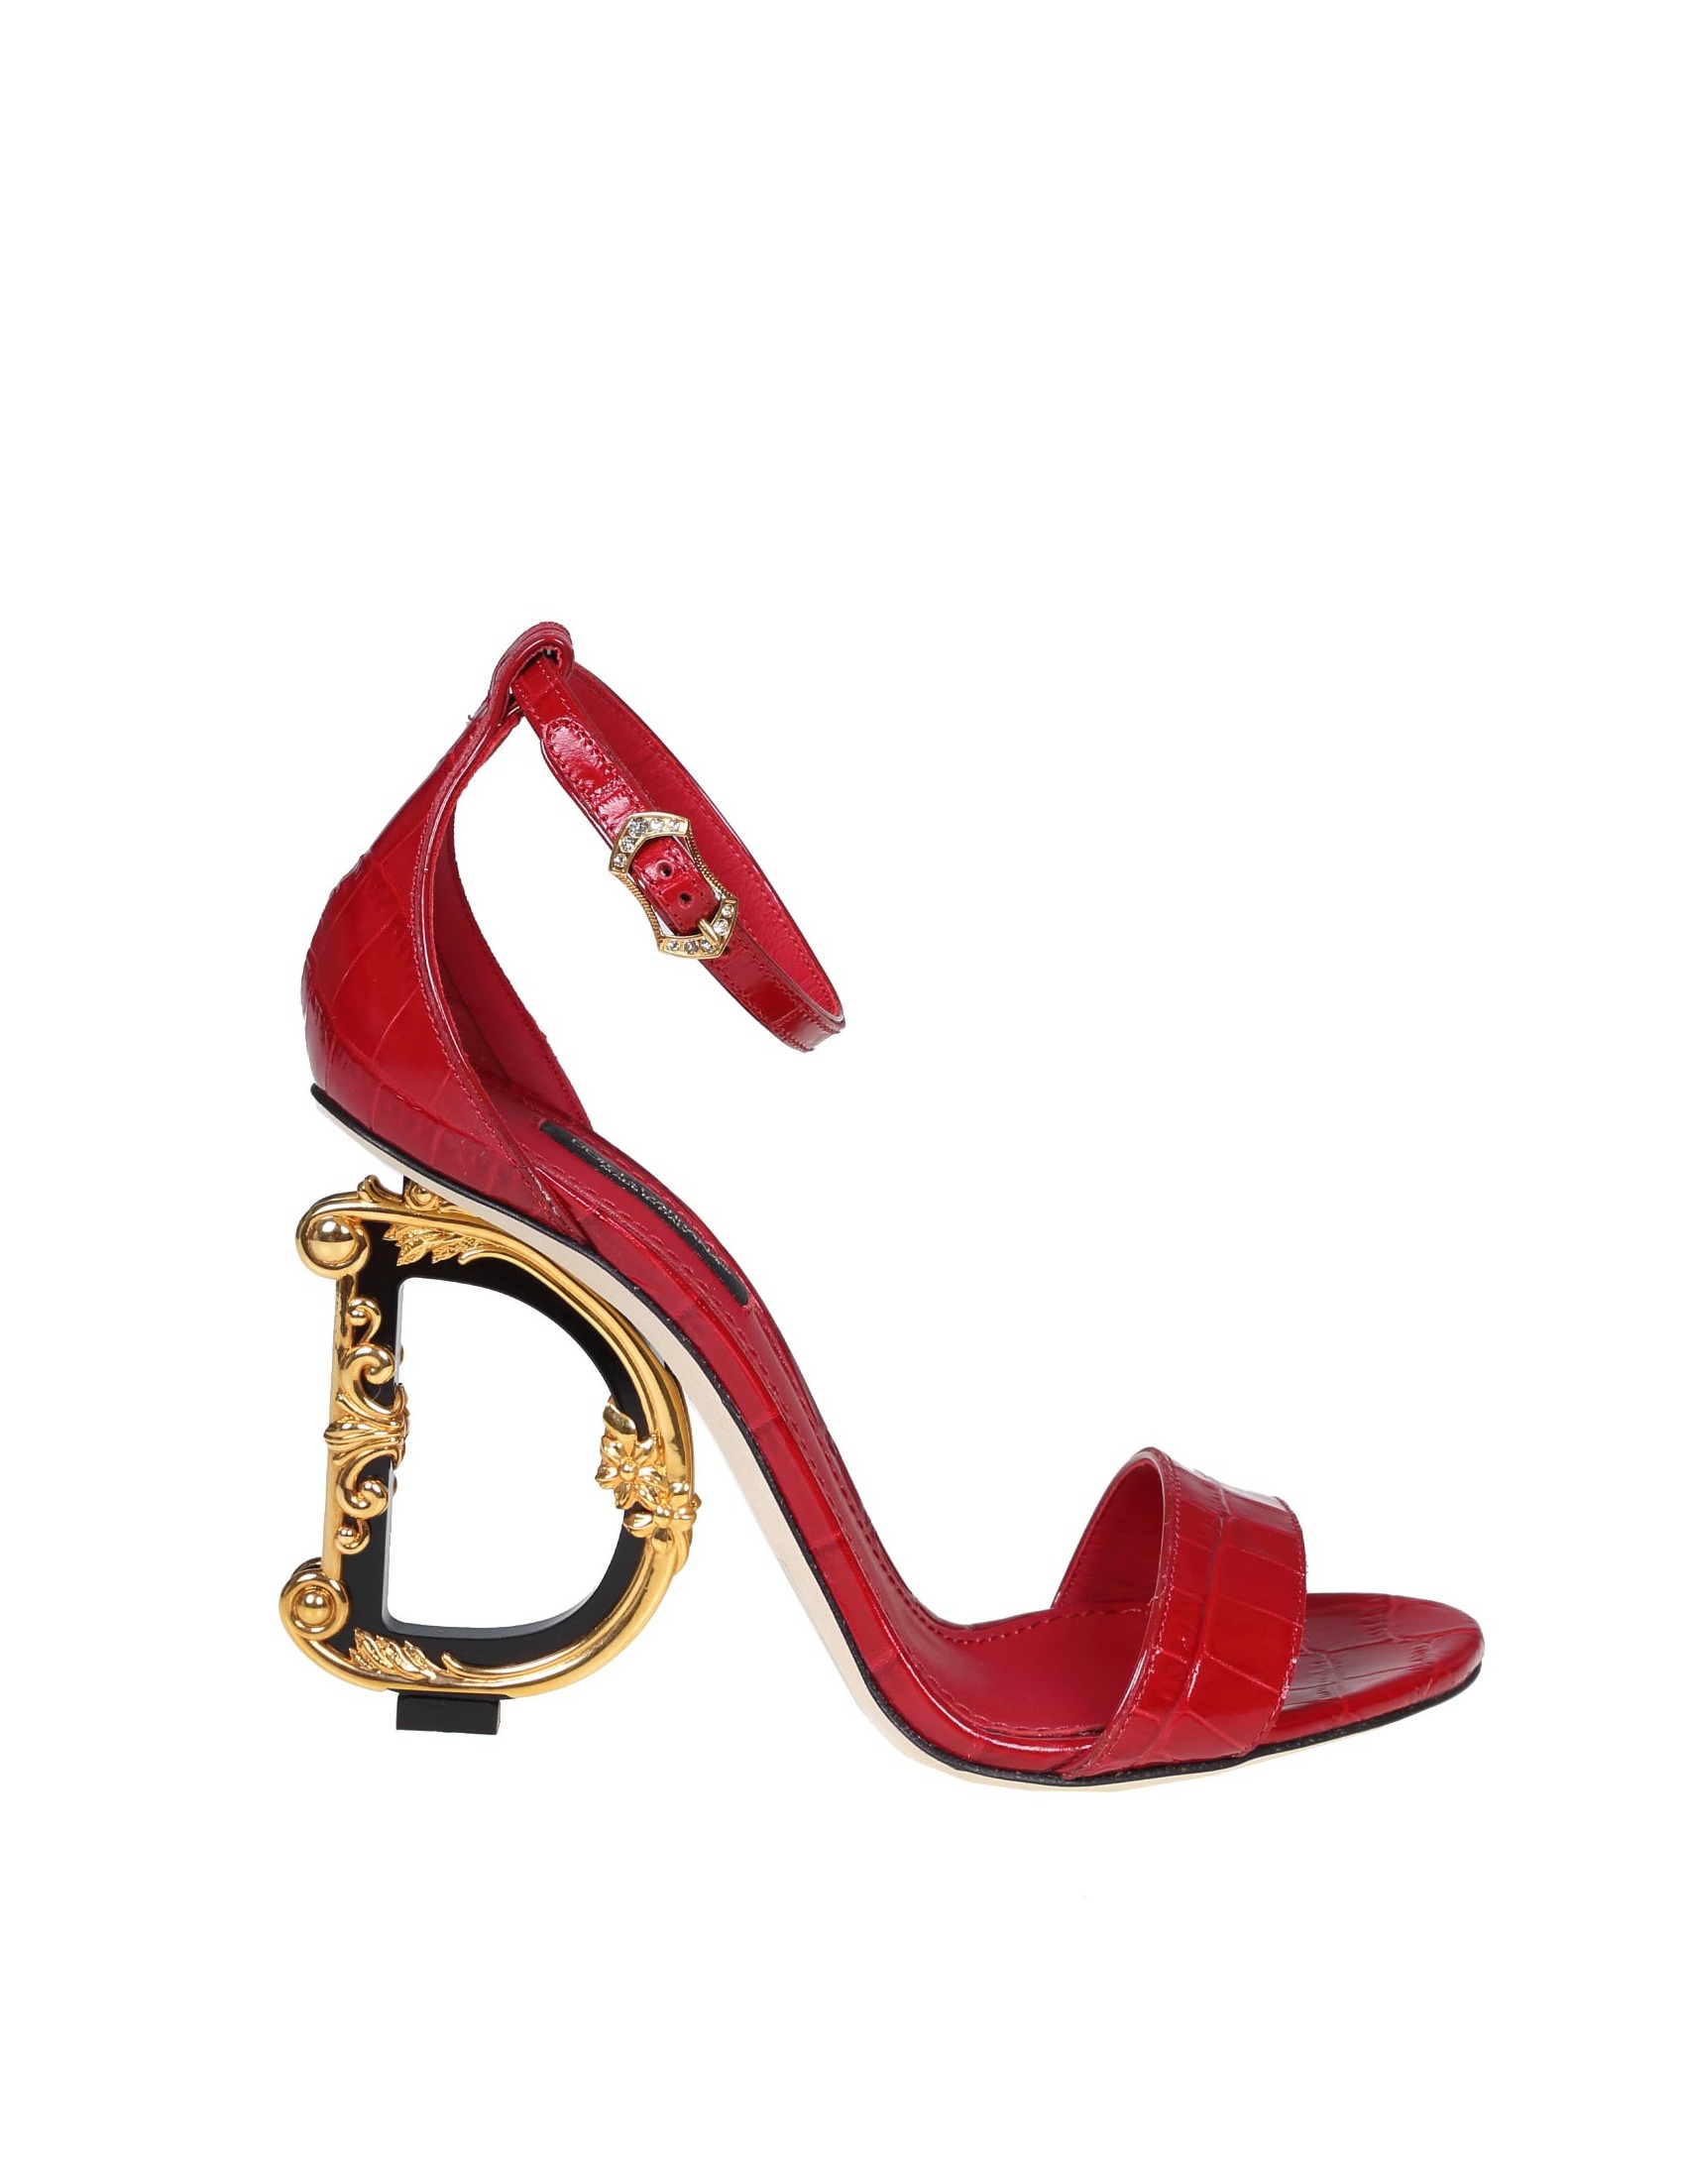 DOLCE & GABBANA DEVOTION SANDAL IN CHERRY COLOR LEATHER